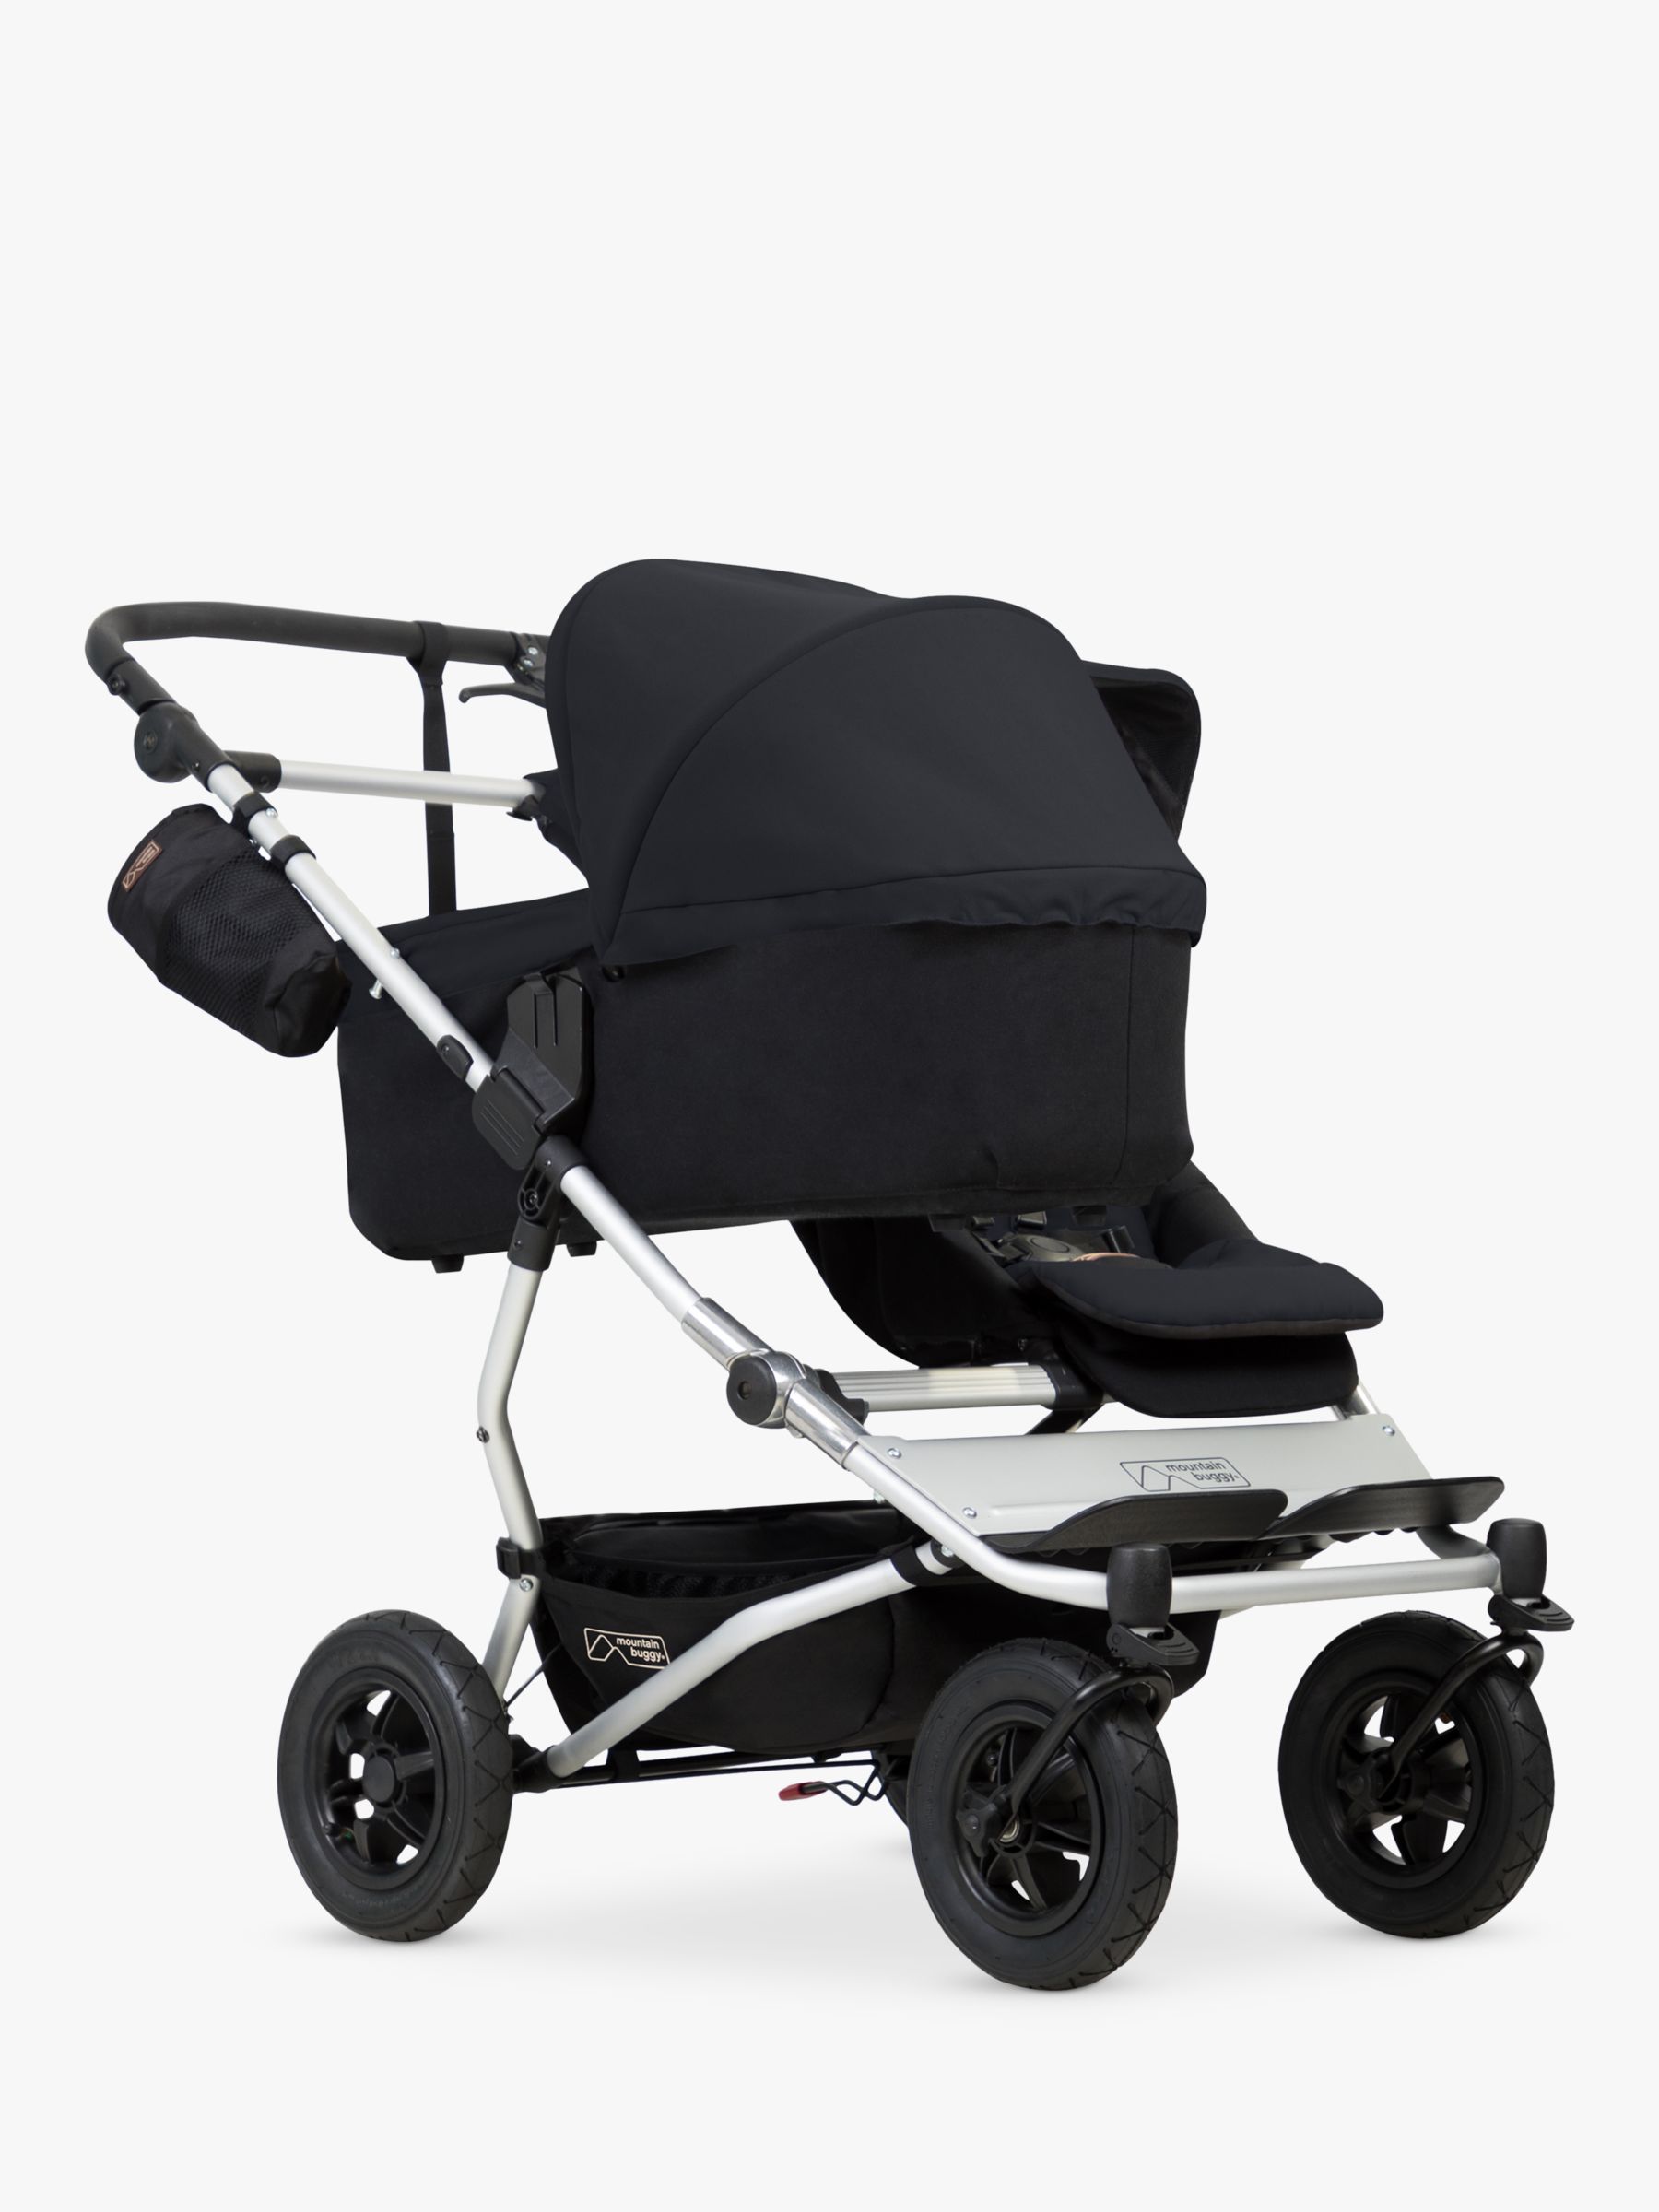 mountain buggy duet for sale